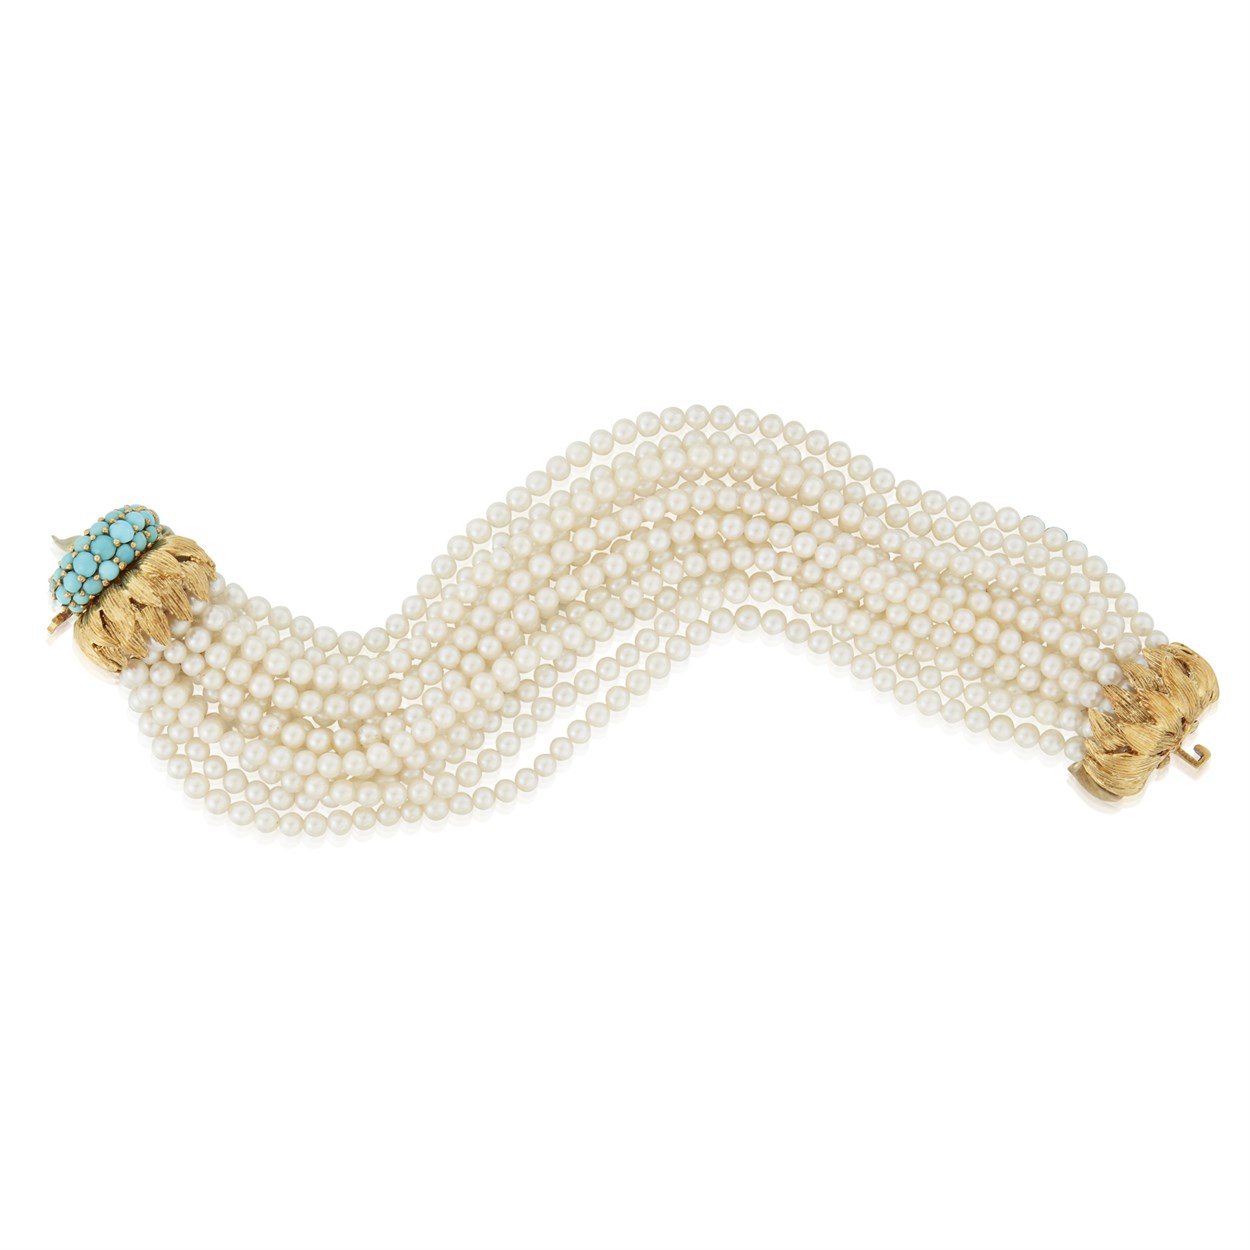 Lot 60 - An eighteen karat gold, cultured pearl, and turquoise bracelet